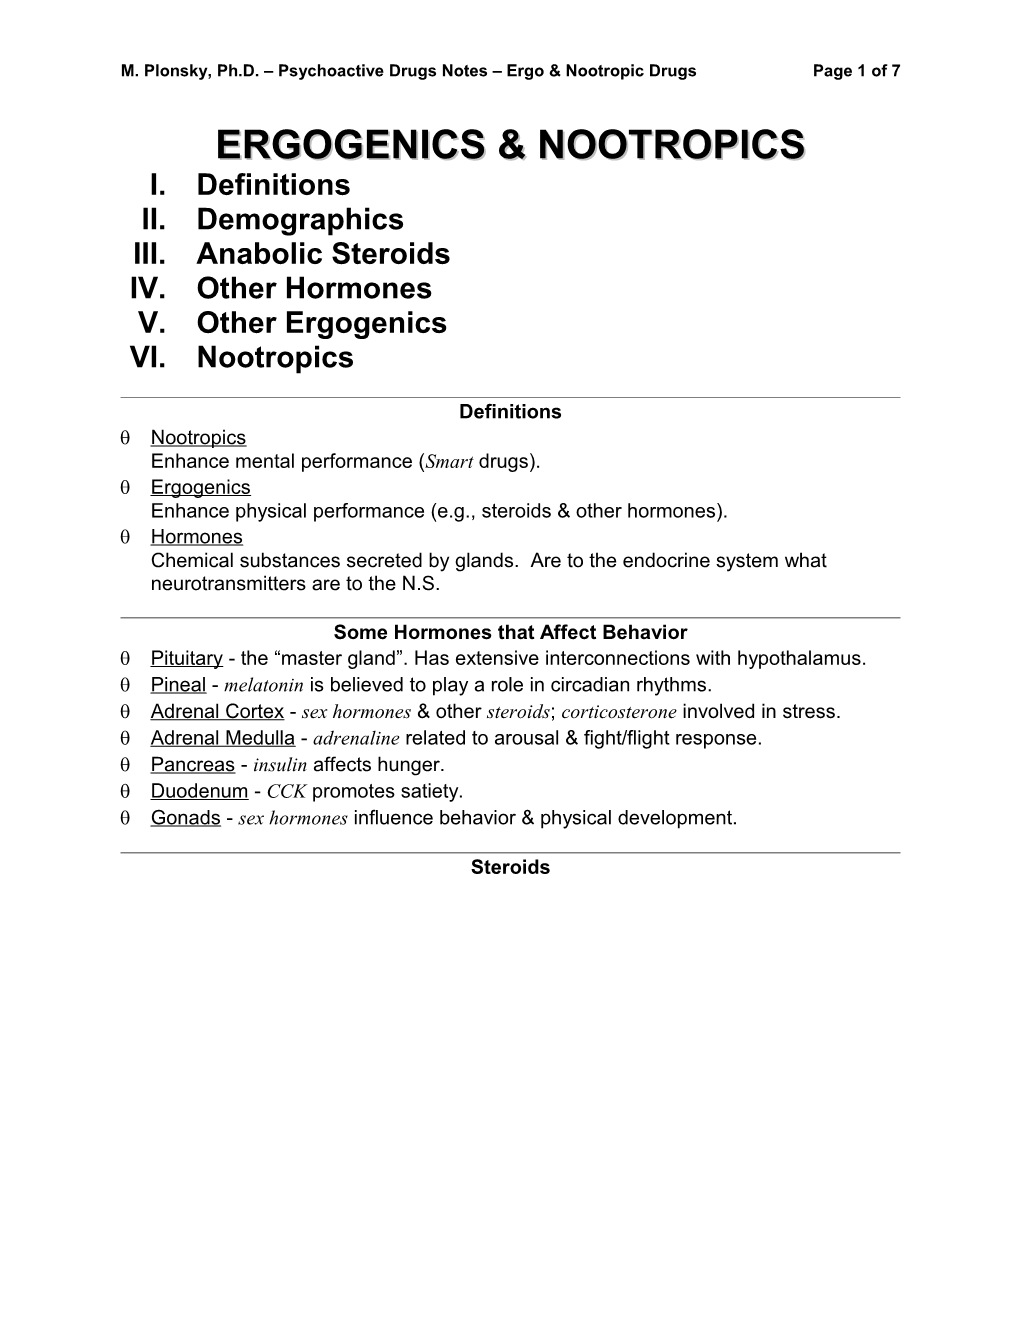 M. Plonsky, Ph.D. Psychoactive Drugs Notes Ergo & Nootropic Drugs Page 6 of 6